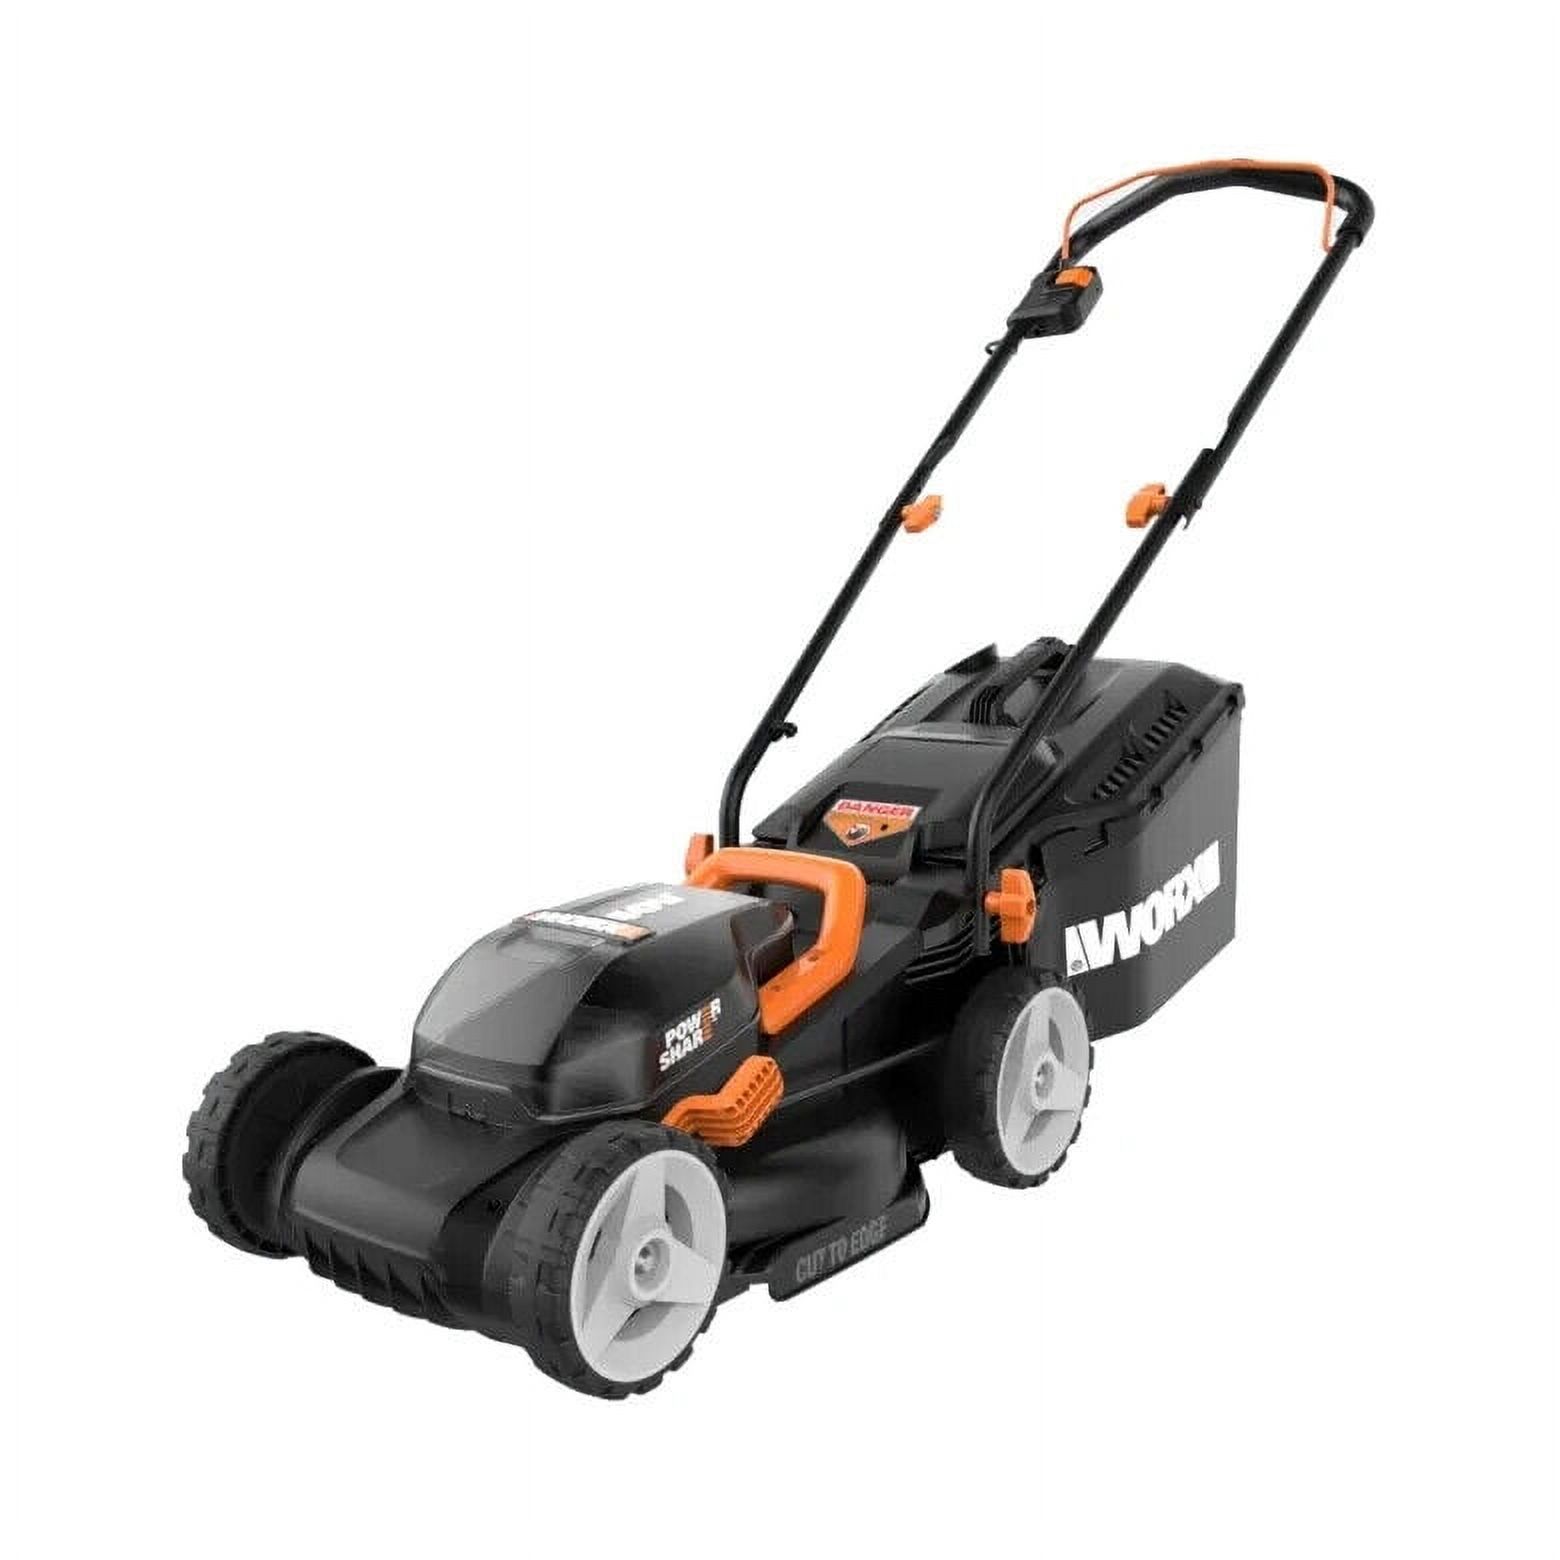 Worx WG779.9 40V Power Share 4.0Ah 14" Cordless Lawn Mower (Tool Only) - image 1 of 10